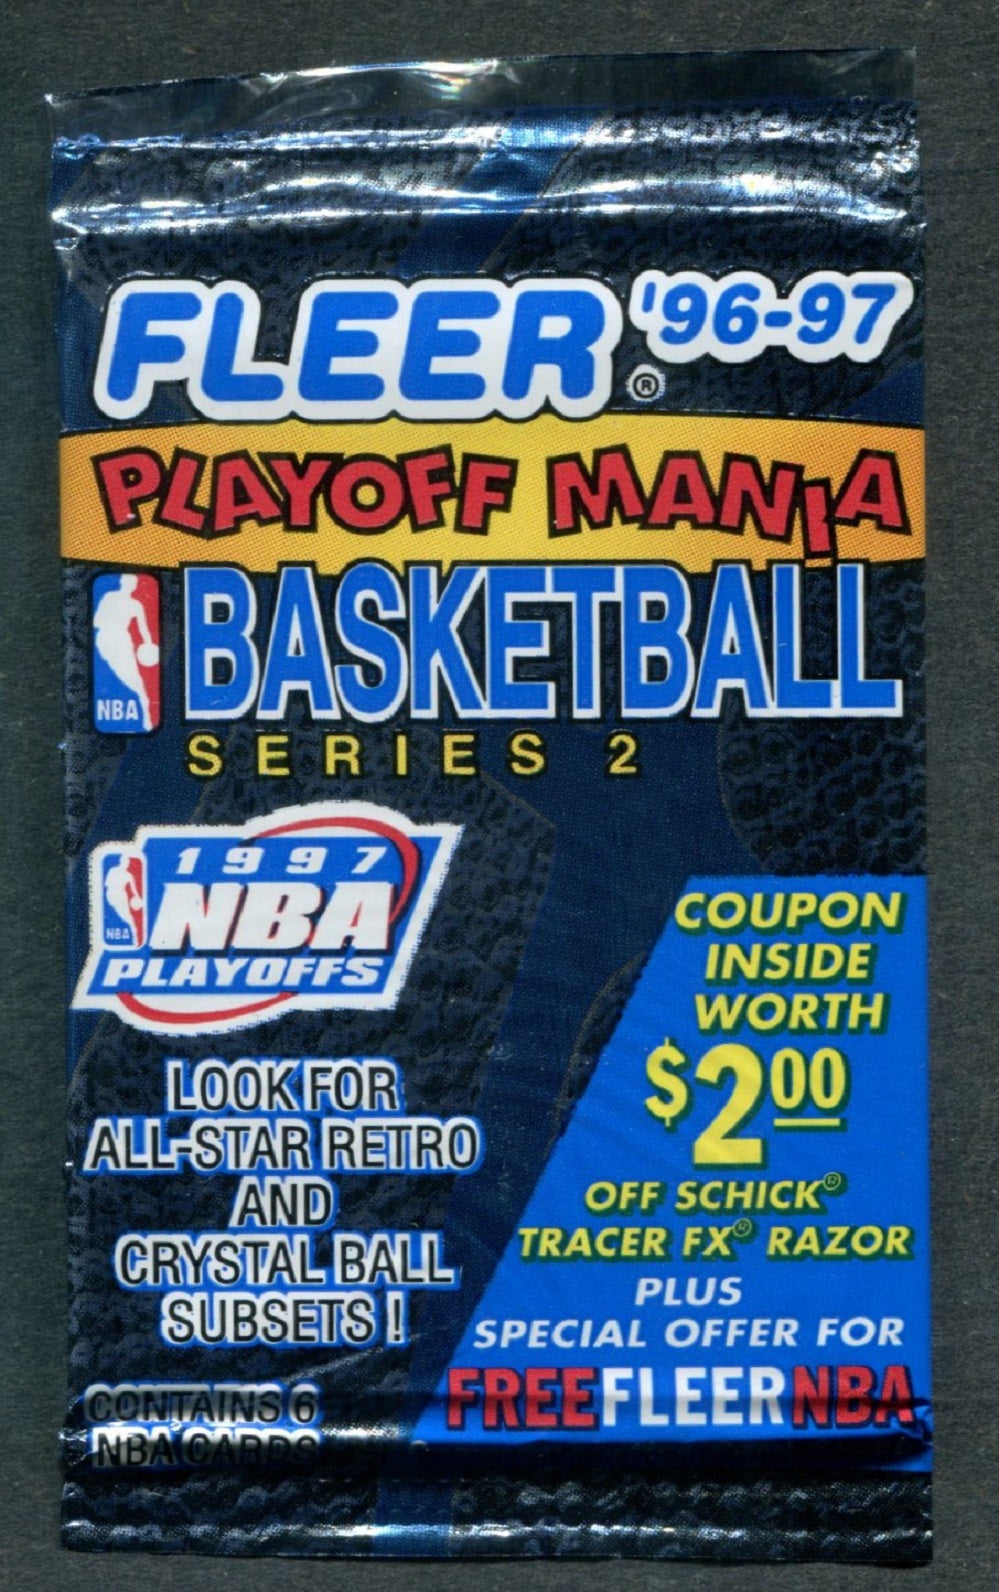 1996/97 Fleer Basketball Series 2 Unopened Pack (Playoff Mania) (6 Cards)